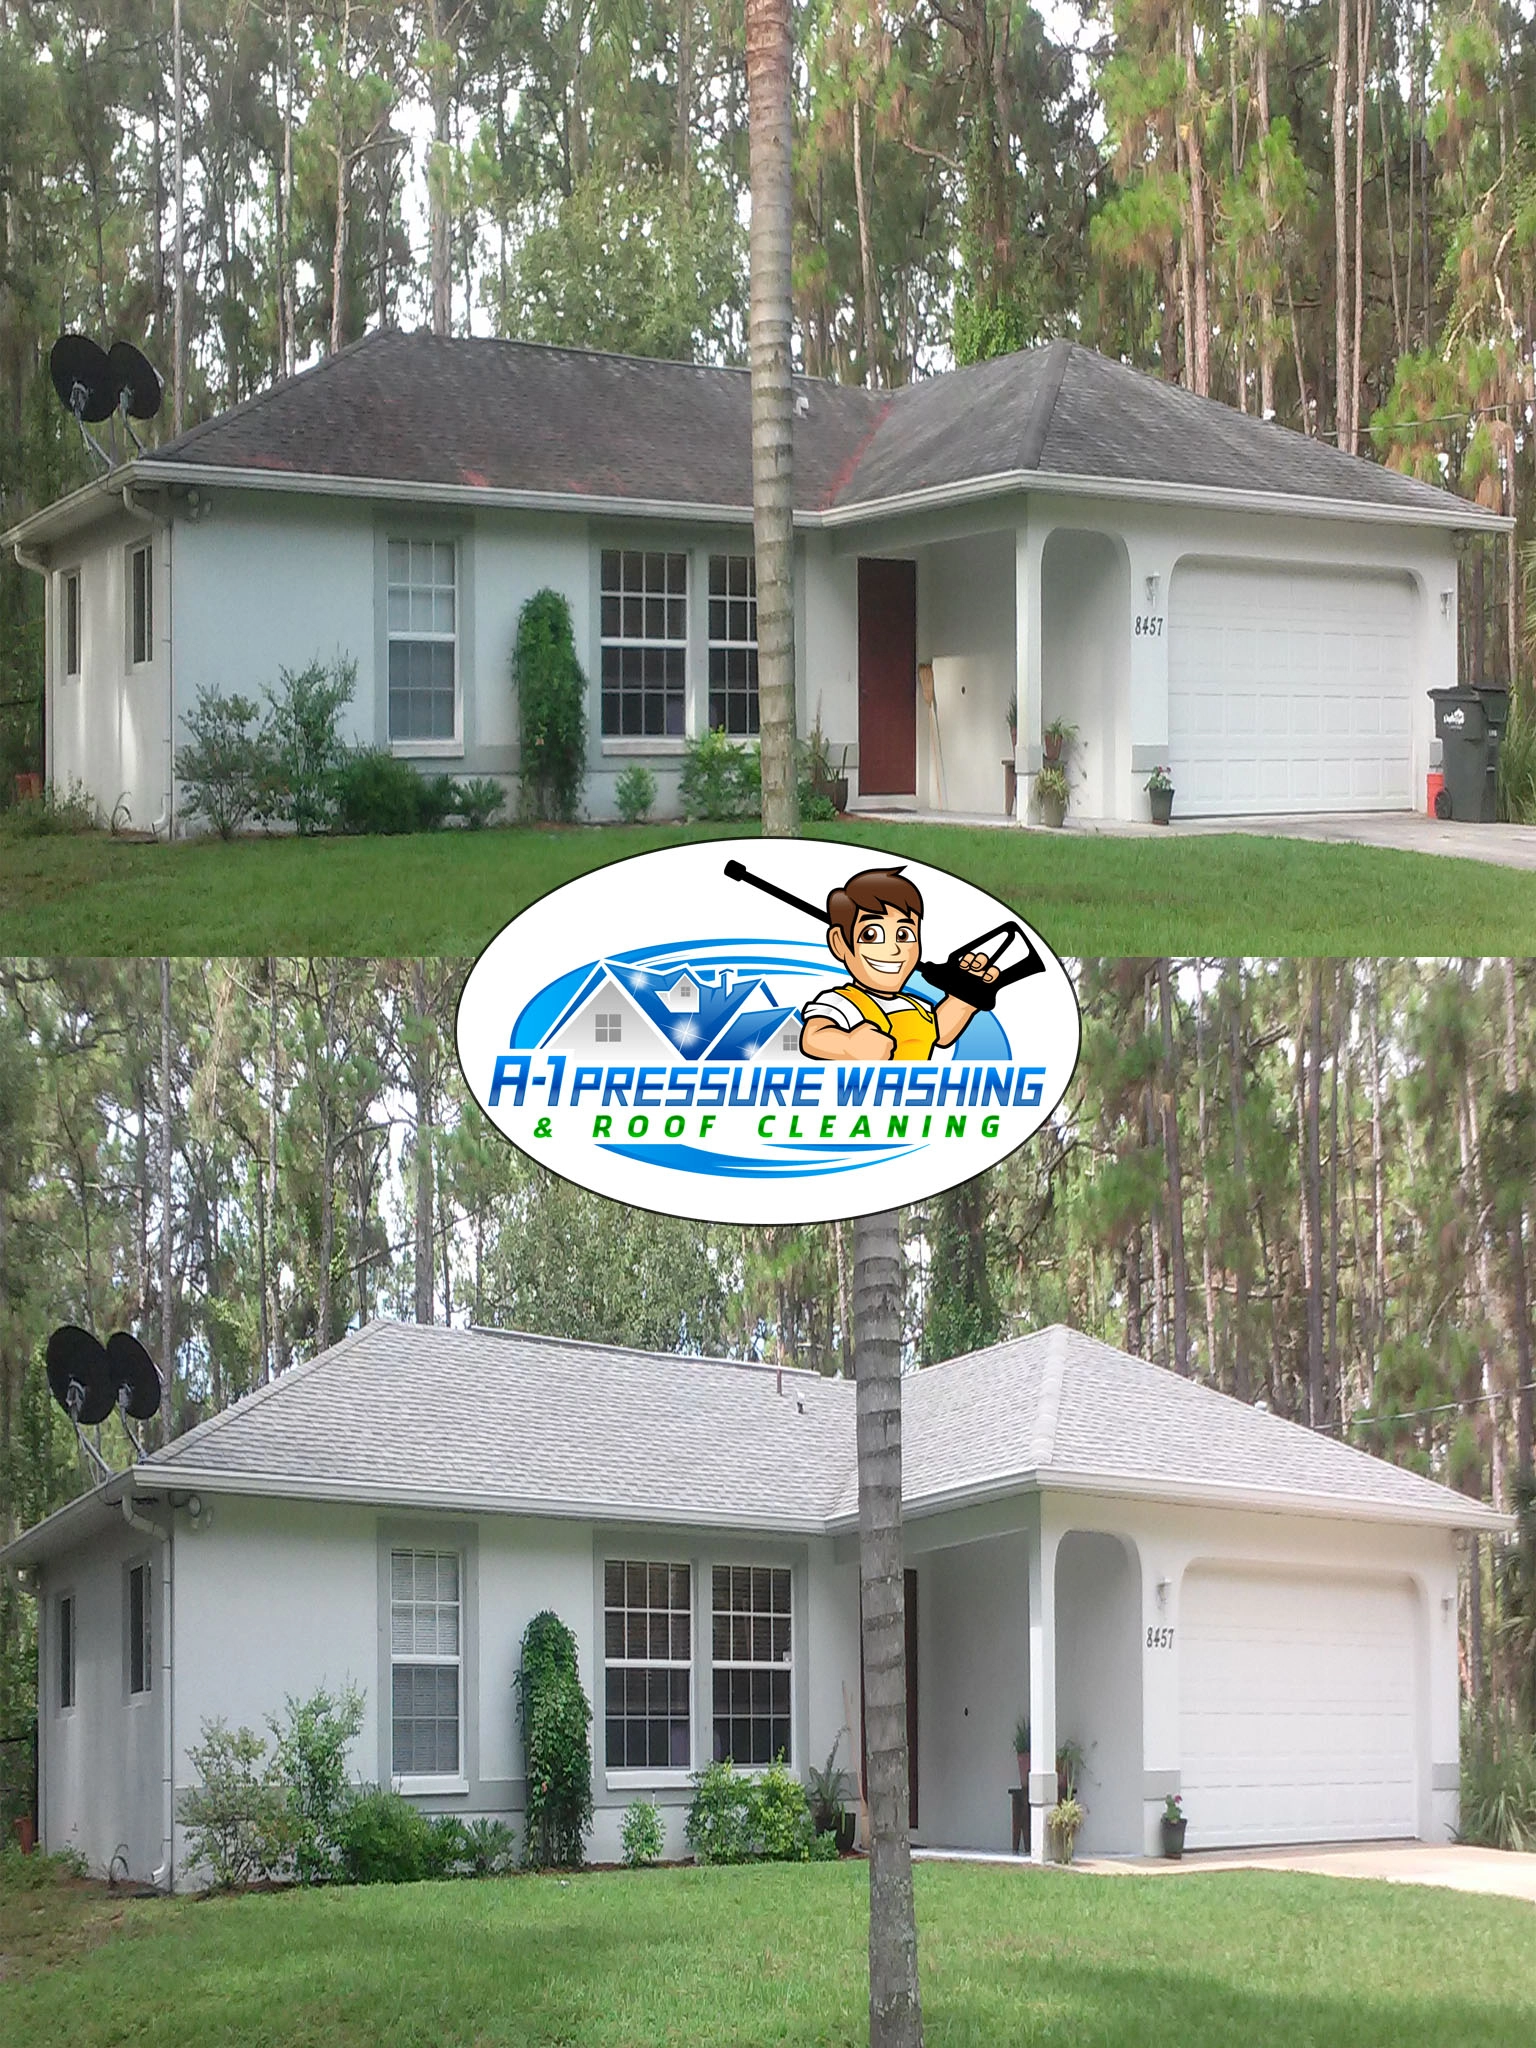 Shingle Roof Cleaning | A-1 Pressure Washing & Roof Cleaning | 941-815-8454